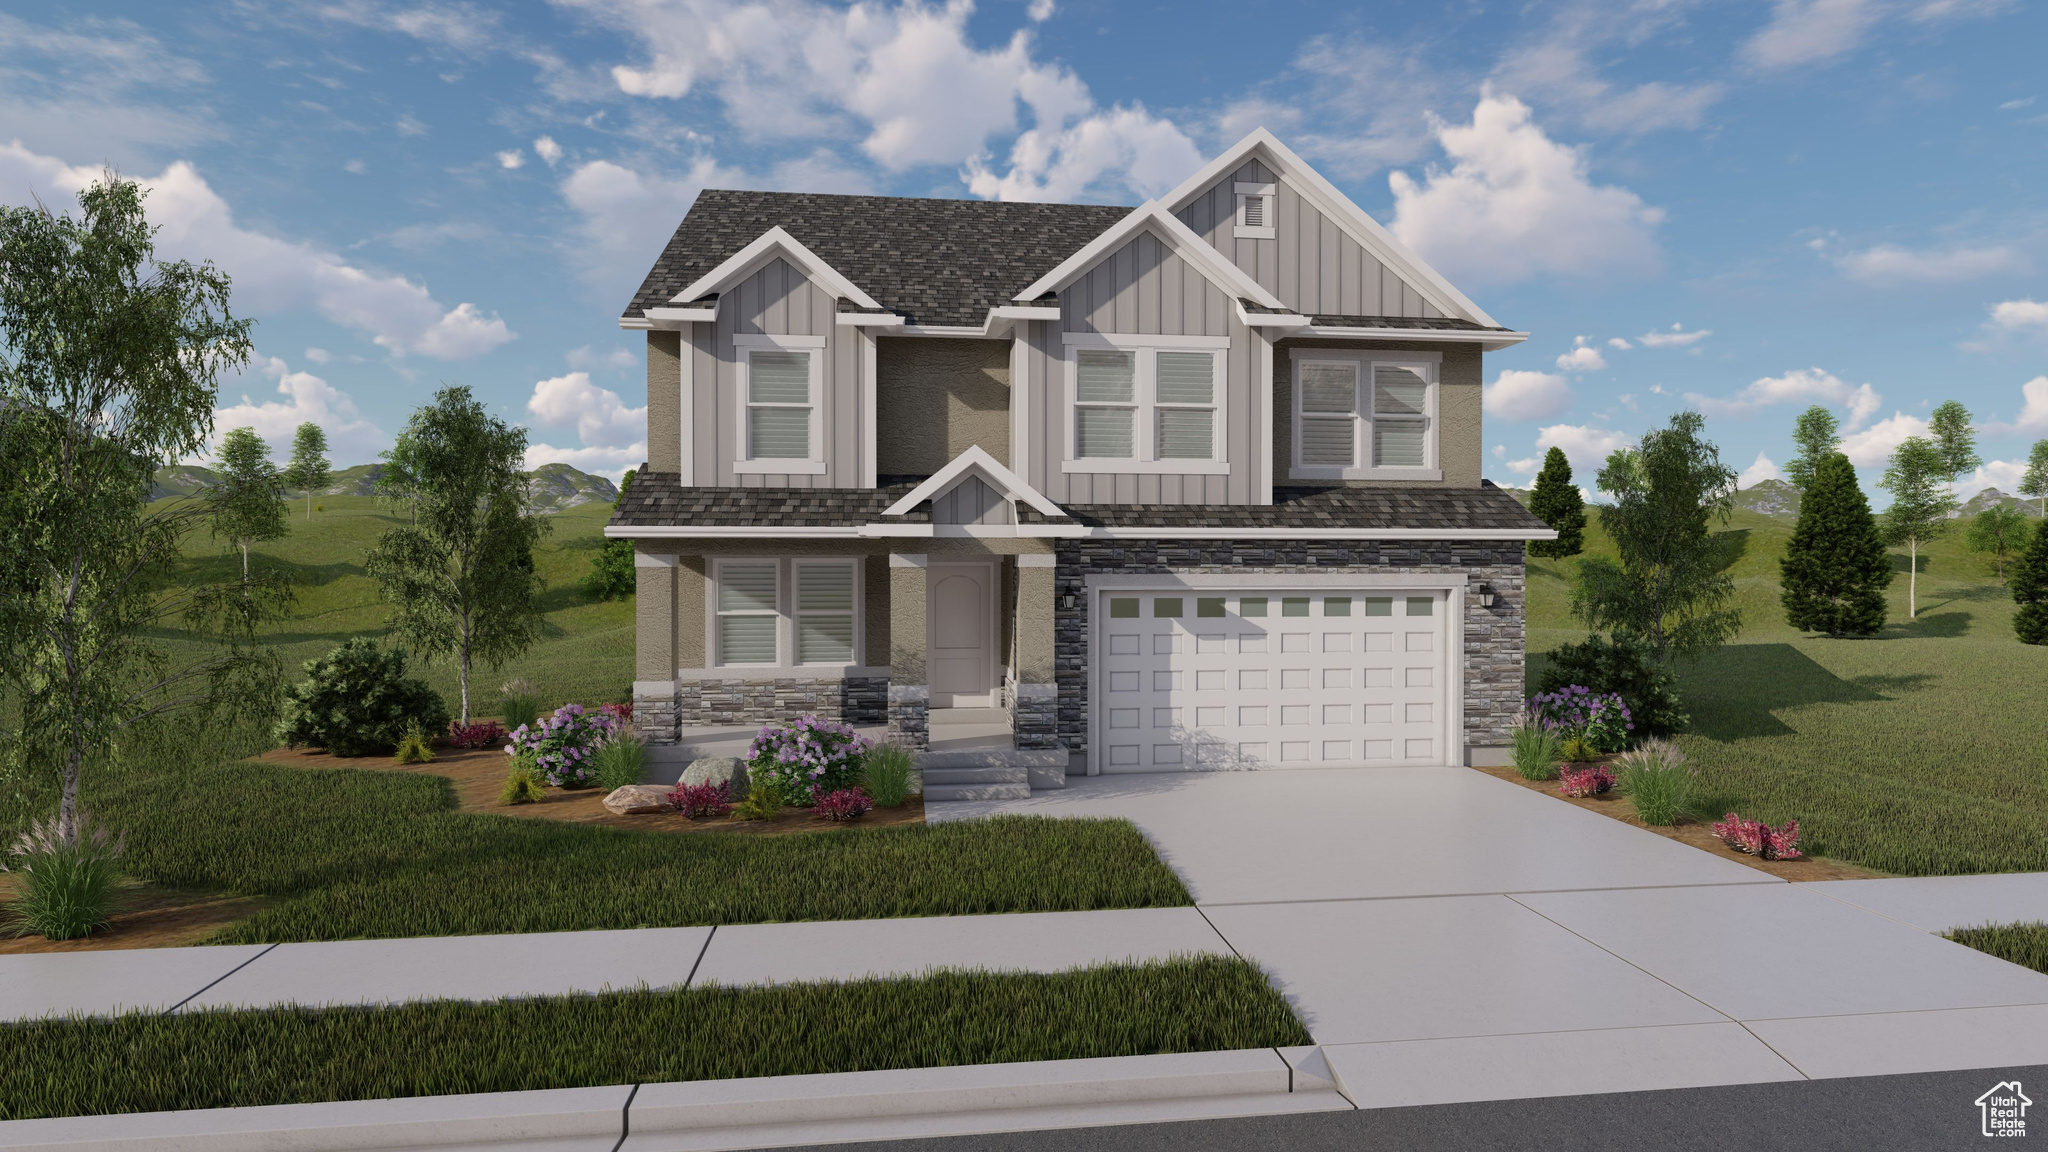 Craftsman-style home with a front yard and a garage